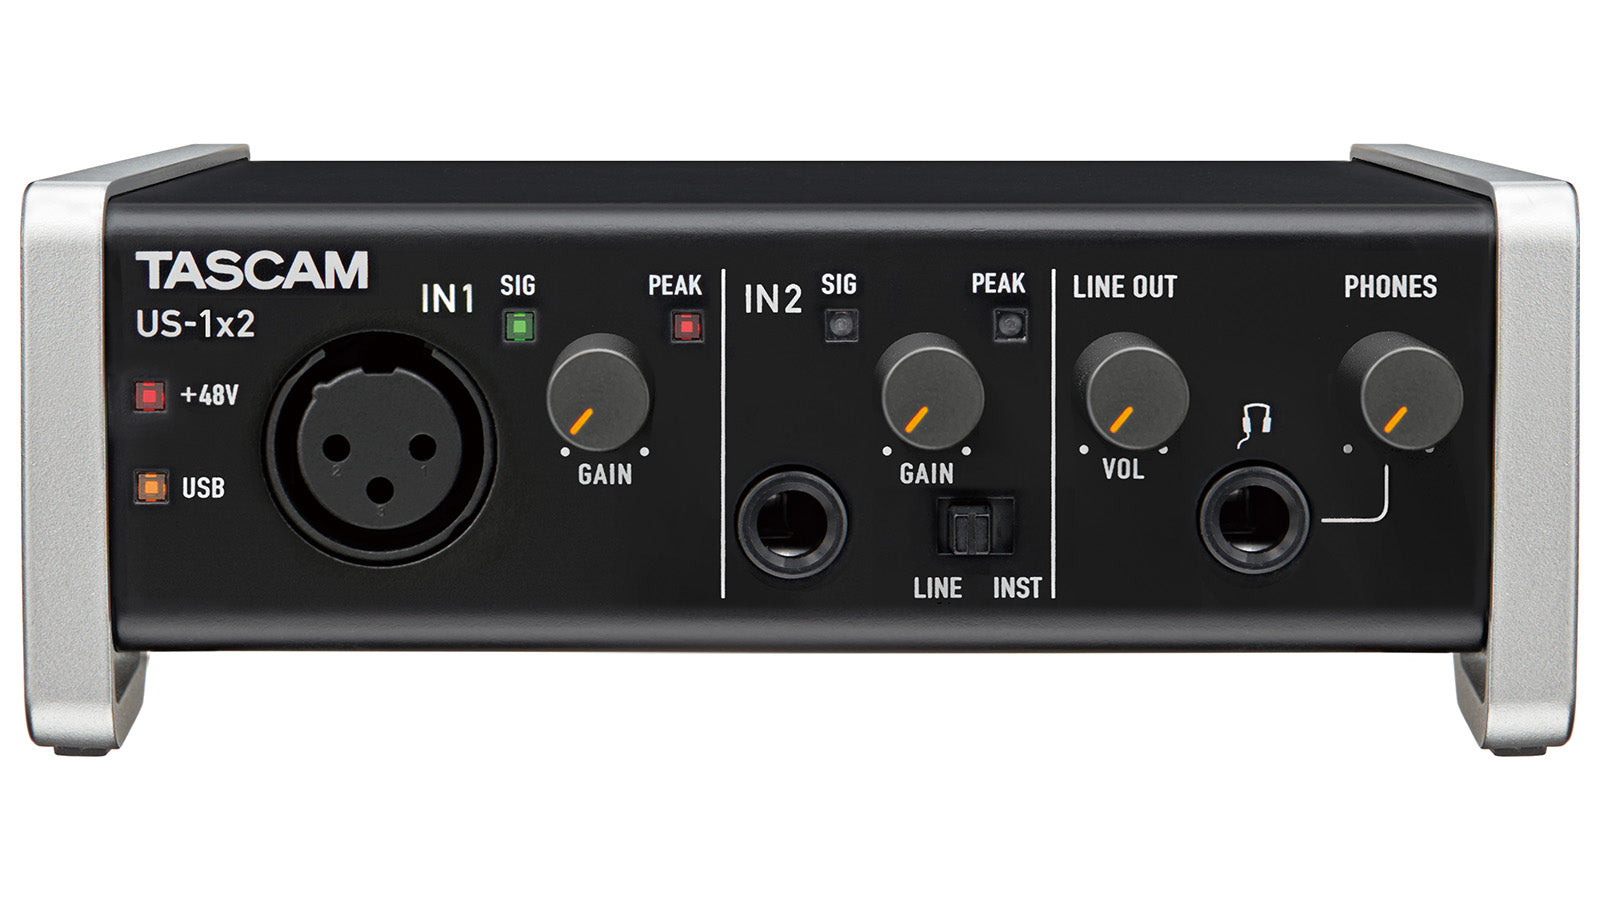 Tascam US-1x2, 2X2 CHANNEL USB AUDIO INTERFACE, 1-in/2-out Audio Inter